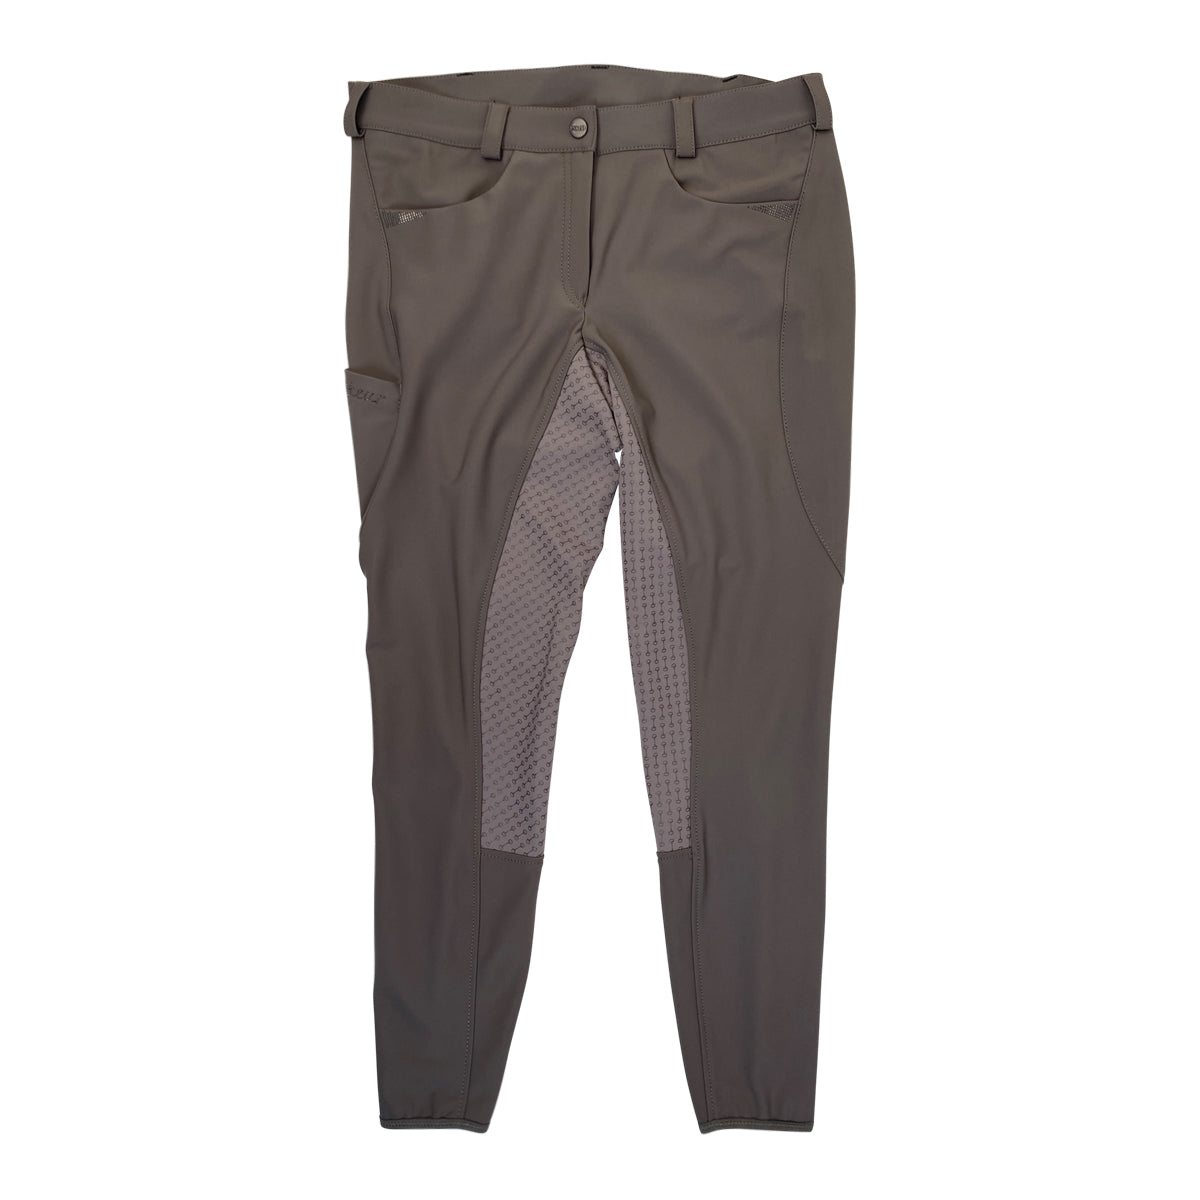 Pikeur 'Laure' Full Grip Breeches in Taupe